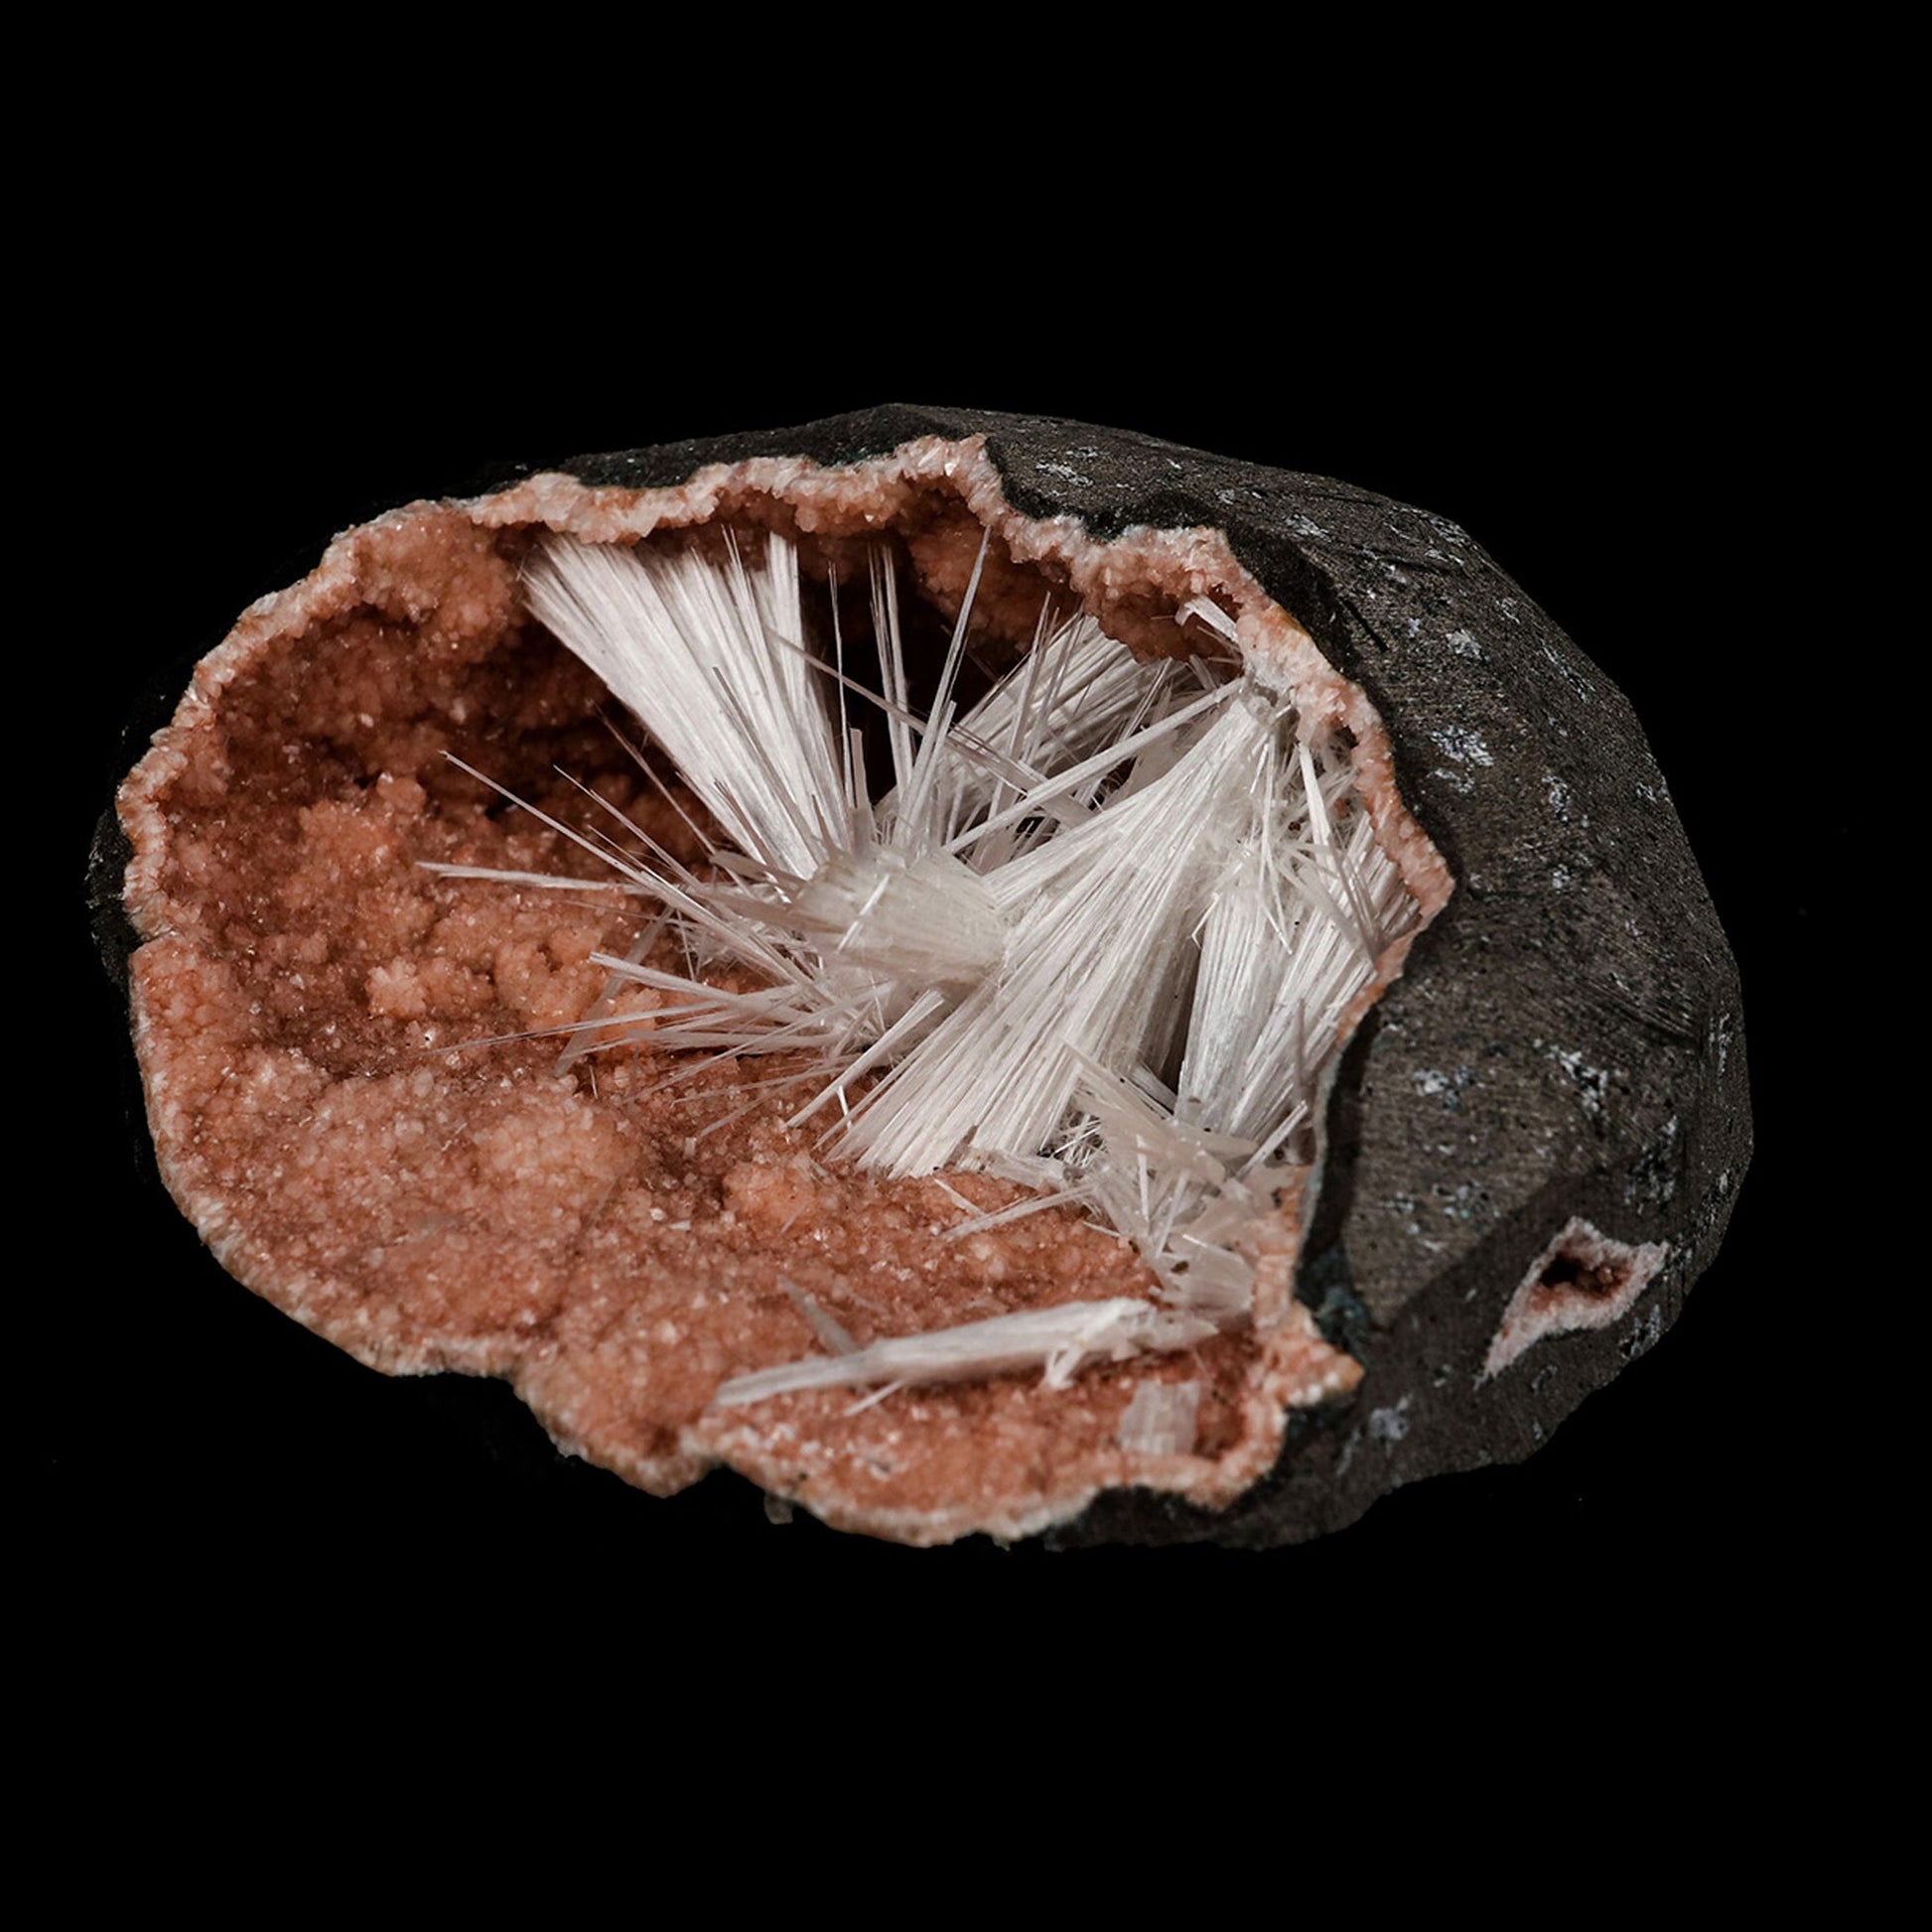 Scolecite Sprays Inside Heulandite Geode Natural Mineral Specimen # B…  https://www.superbminerals.us/products/scolecite-sprays-inside-heulandite-geode-natural-mineral-specimen-b-5269  Features: Scolecite crystals cover a reddish heulandite matrix in a geode. An unwanted piece of rock is removed by sawing. Primary Mineral(s): Scolecite Secondary Mineral(s): HeulanditeMatrix: N/A 4 Inch x 3.5 InchWeight : 343 GmsLocality: Aurangabad, Maharashtra, India Year of Discovery: 2021